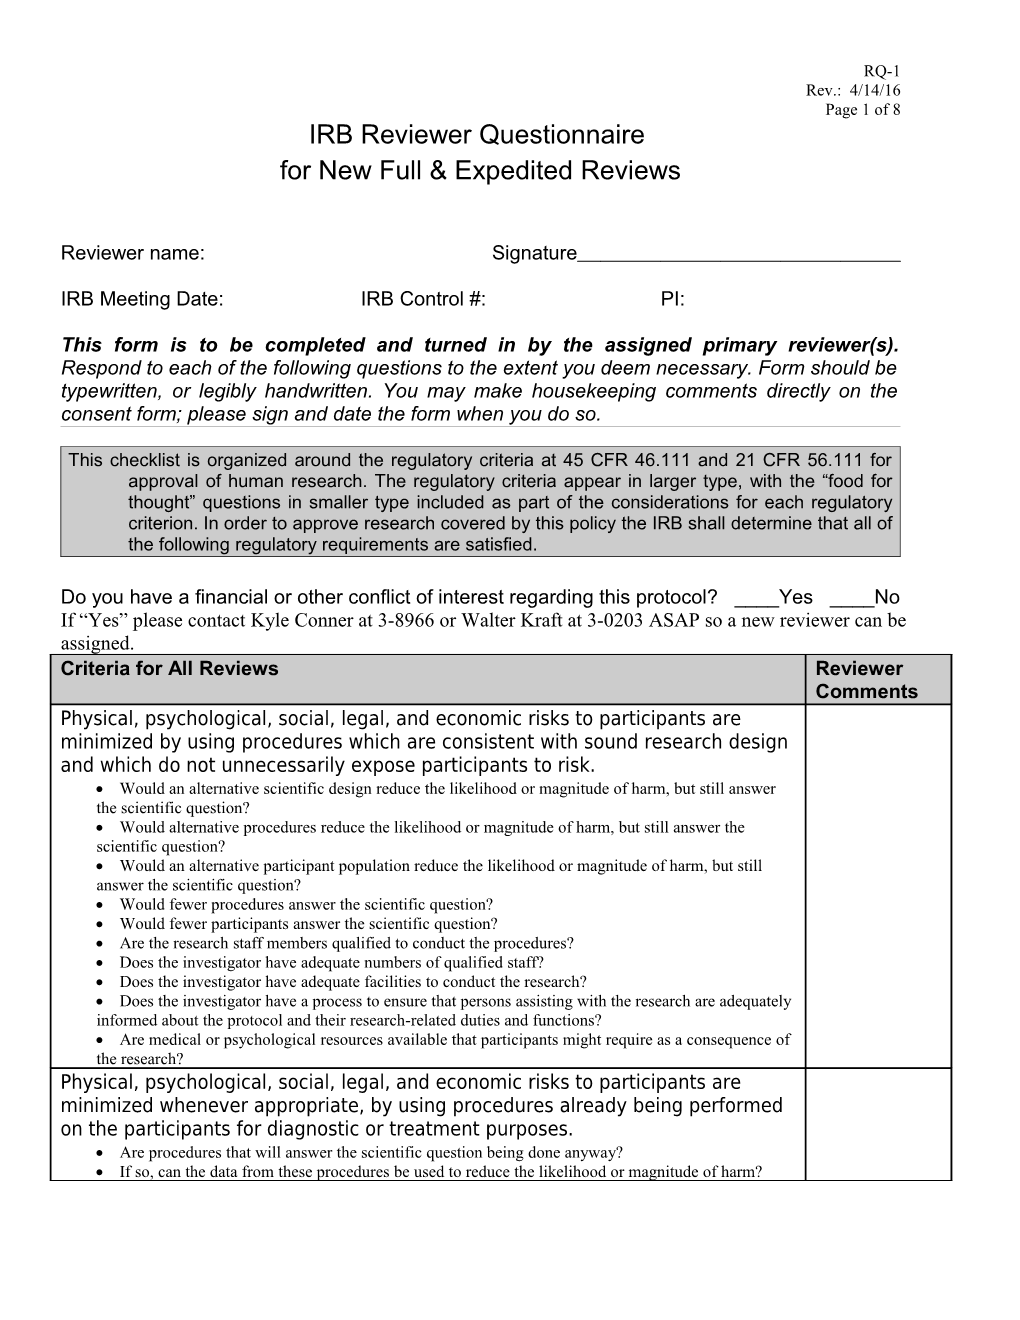 IRB Reviewer Questionnaire